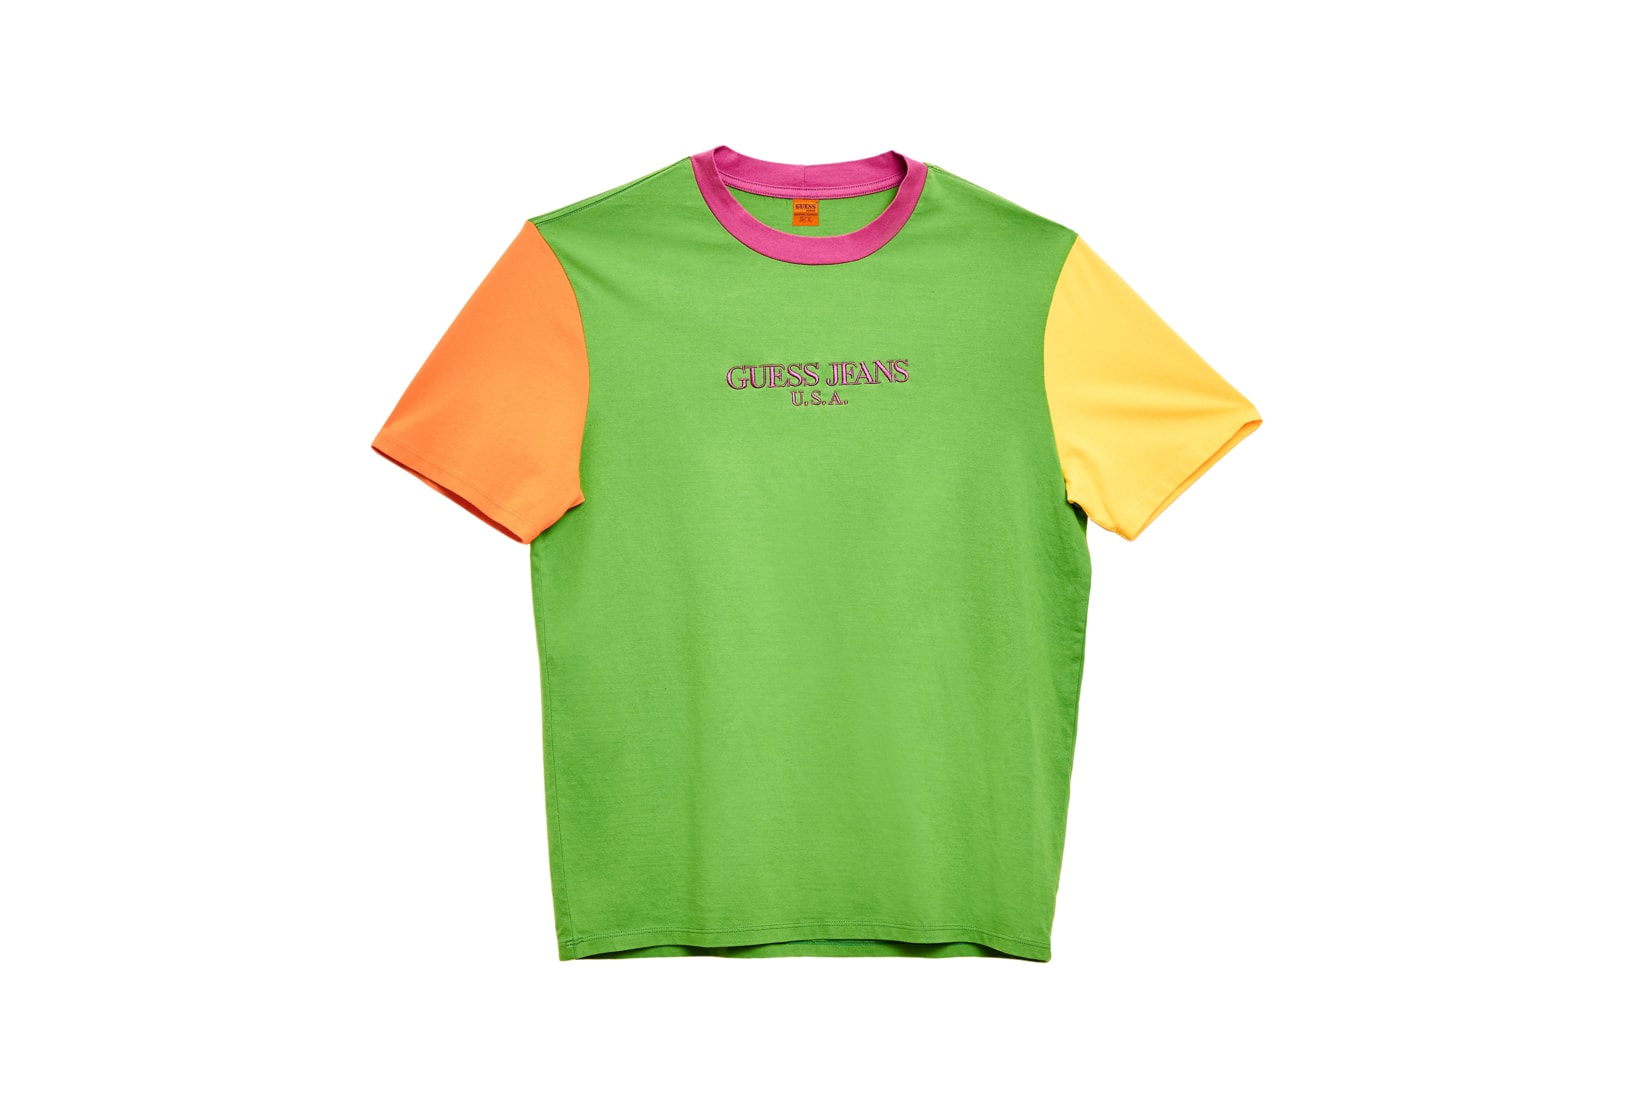 GUESS Jeans U.S.A. Farmers Market Capsule Collection Colorblocked T-Shirt Green Pink Yellow